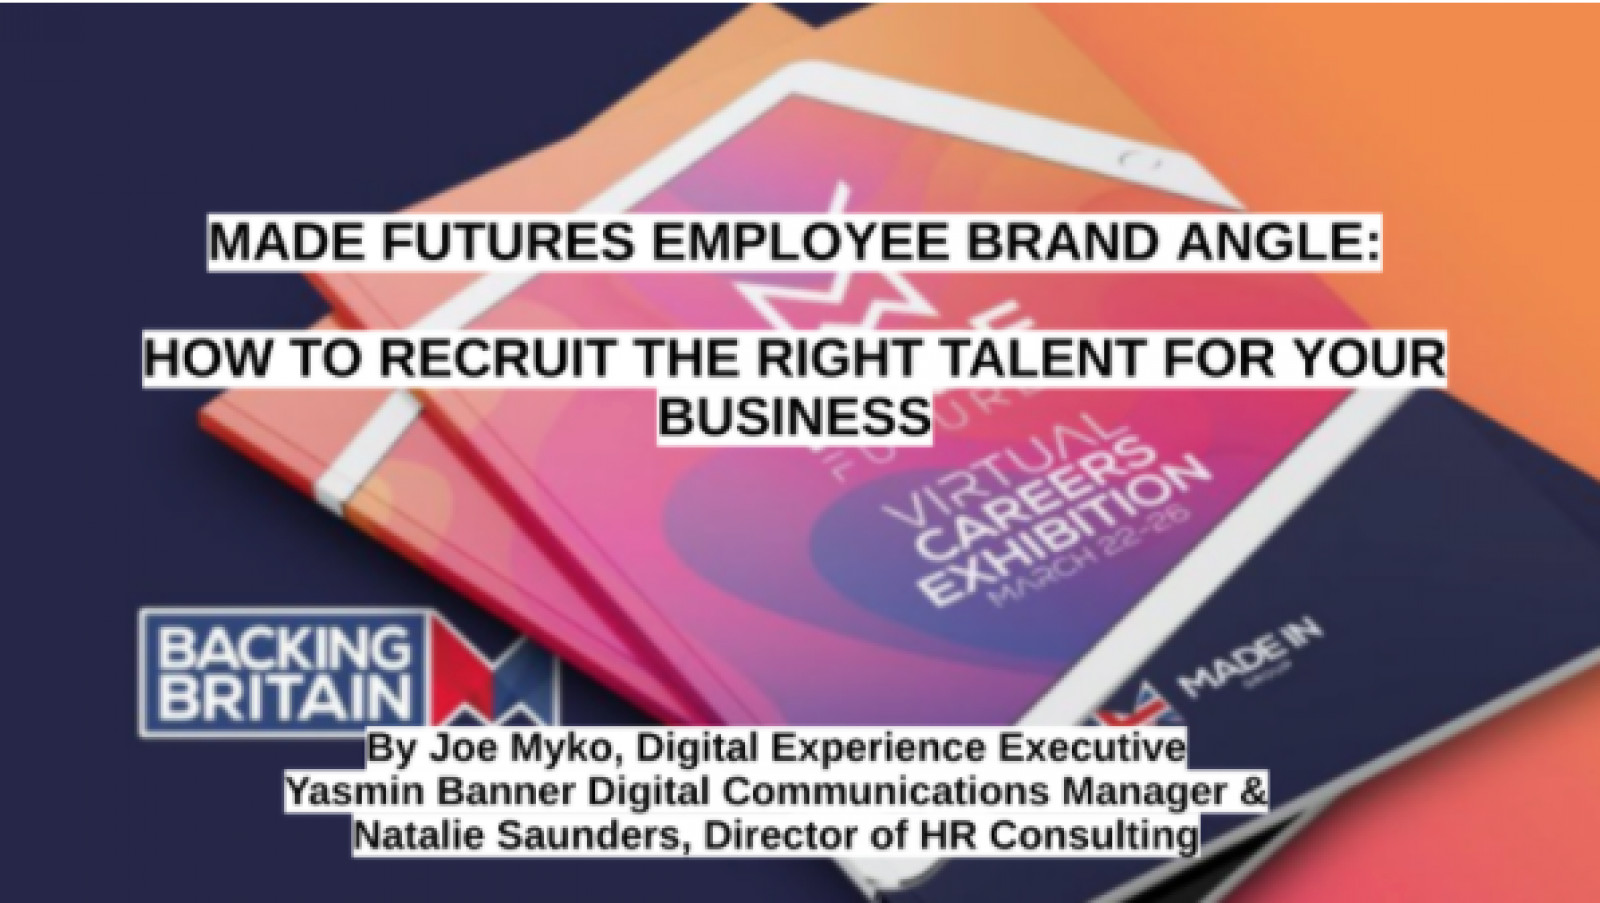 Made Futures Employee Brand Angle: How to Recruit the Right Talent For Your Business